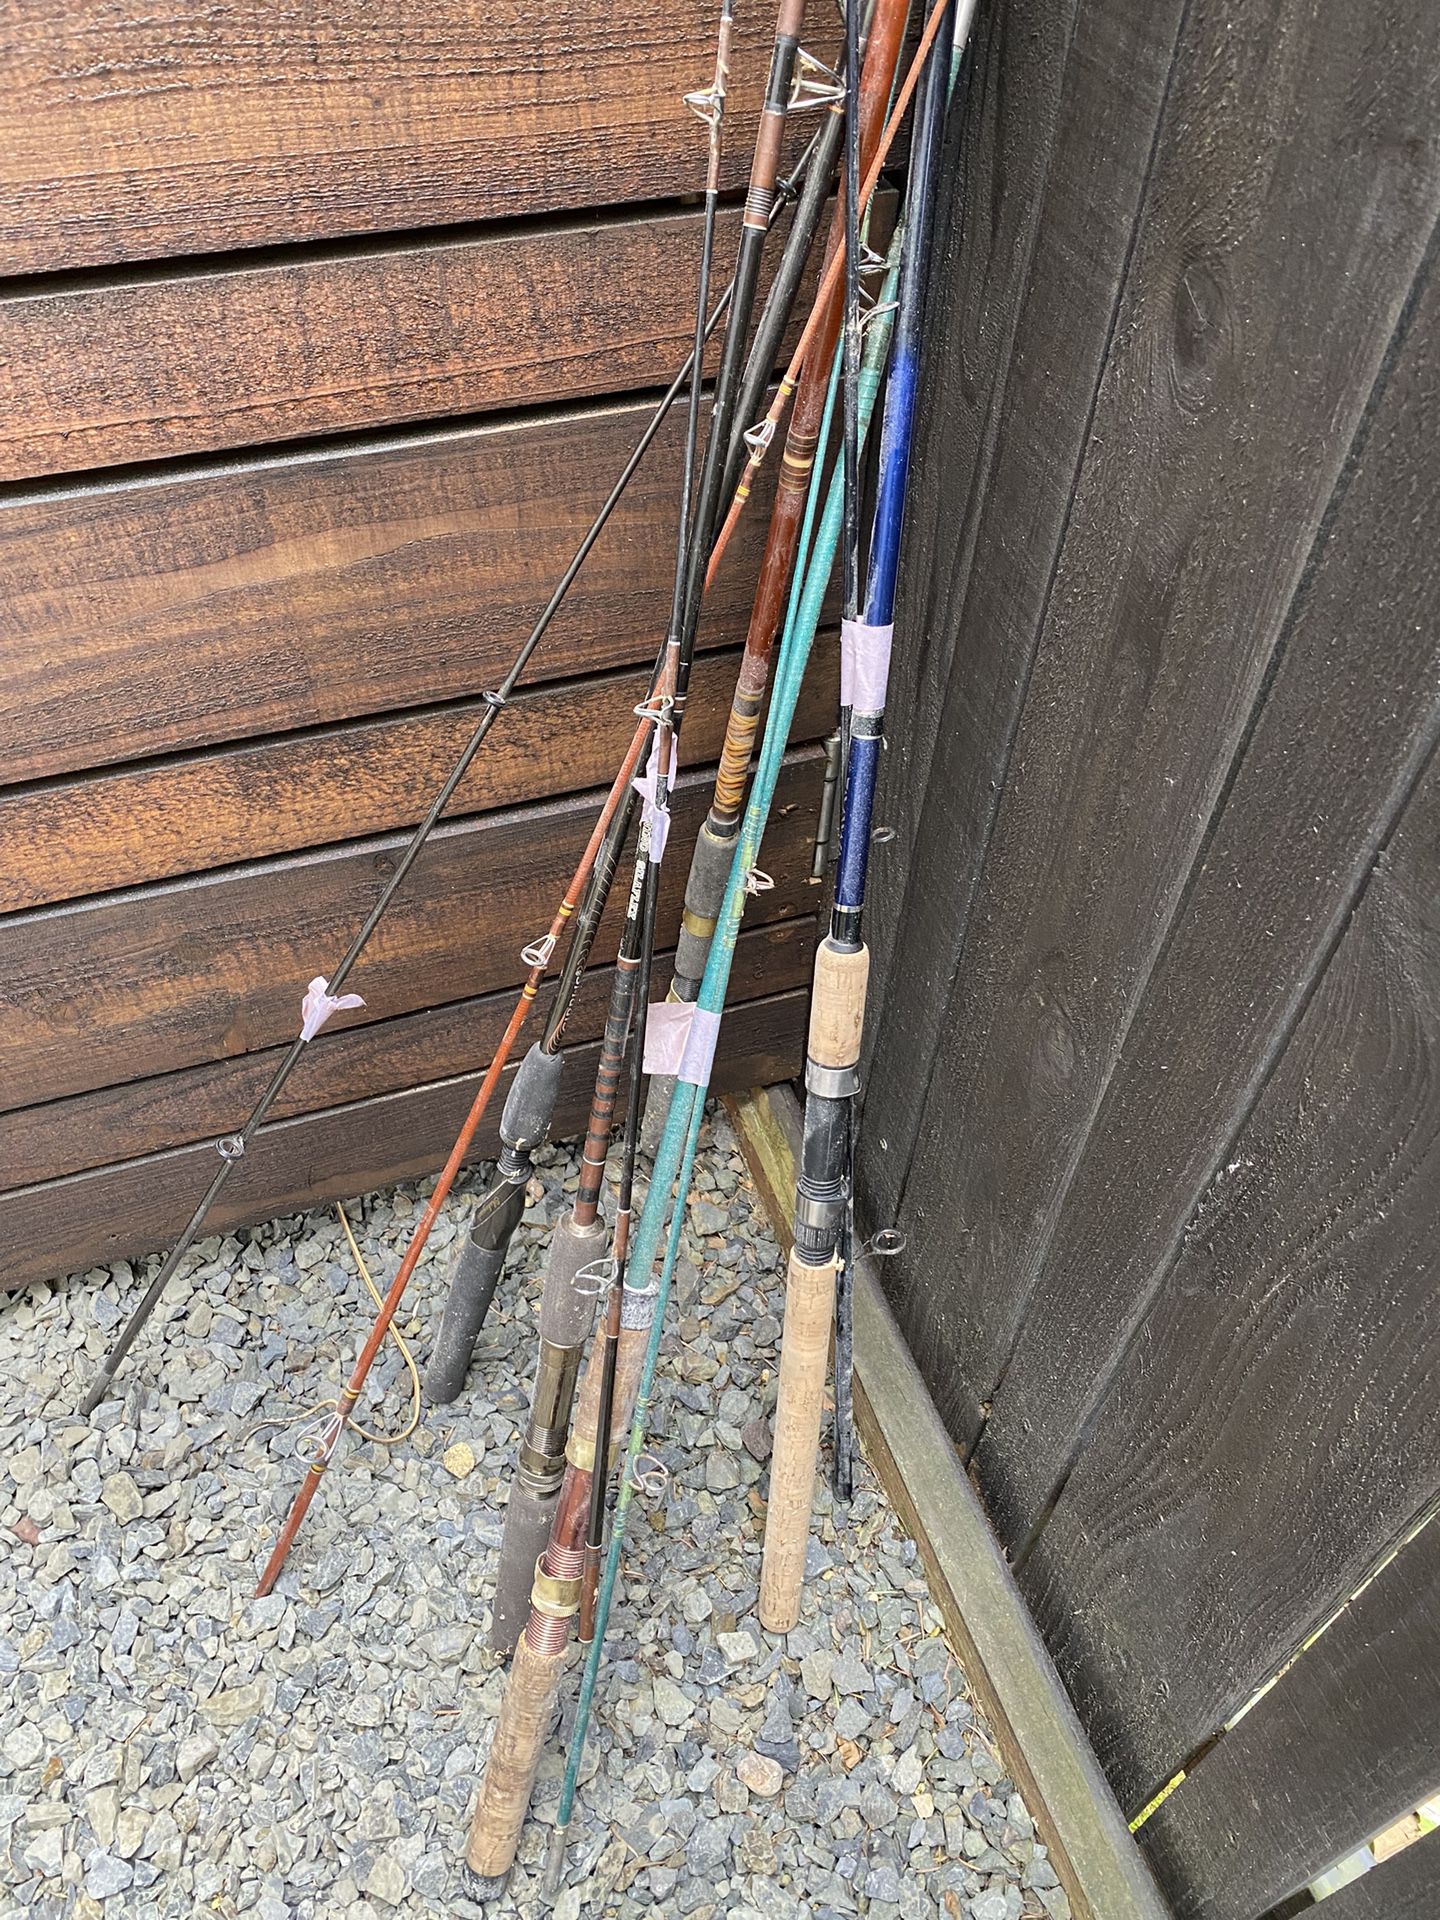 Fishing Rods Miscellaneous